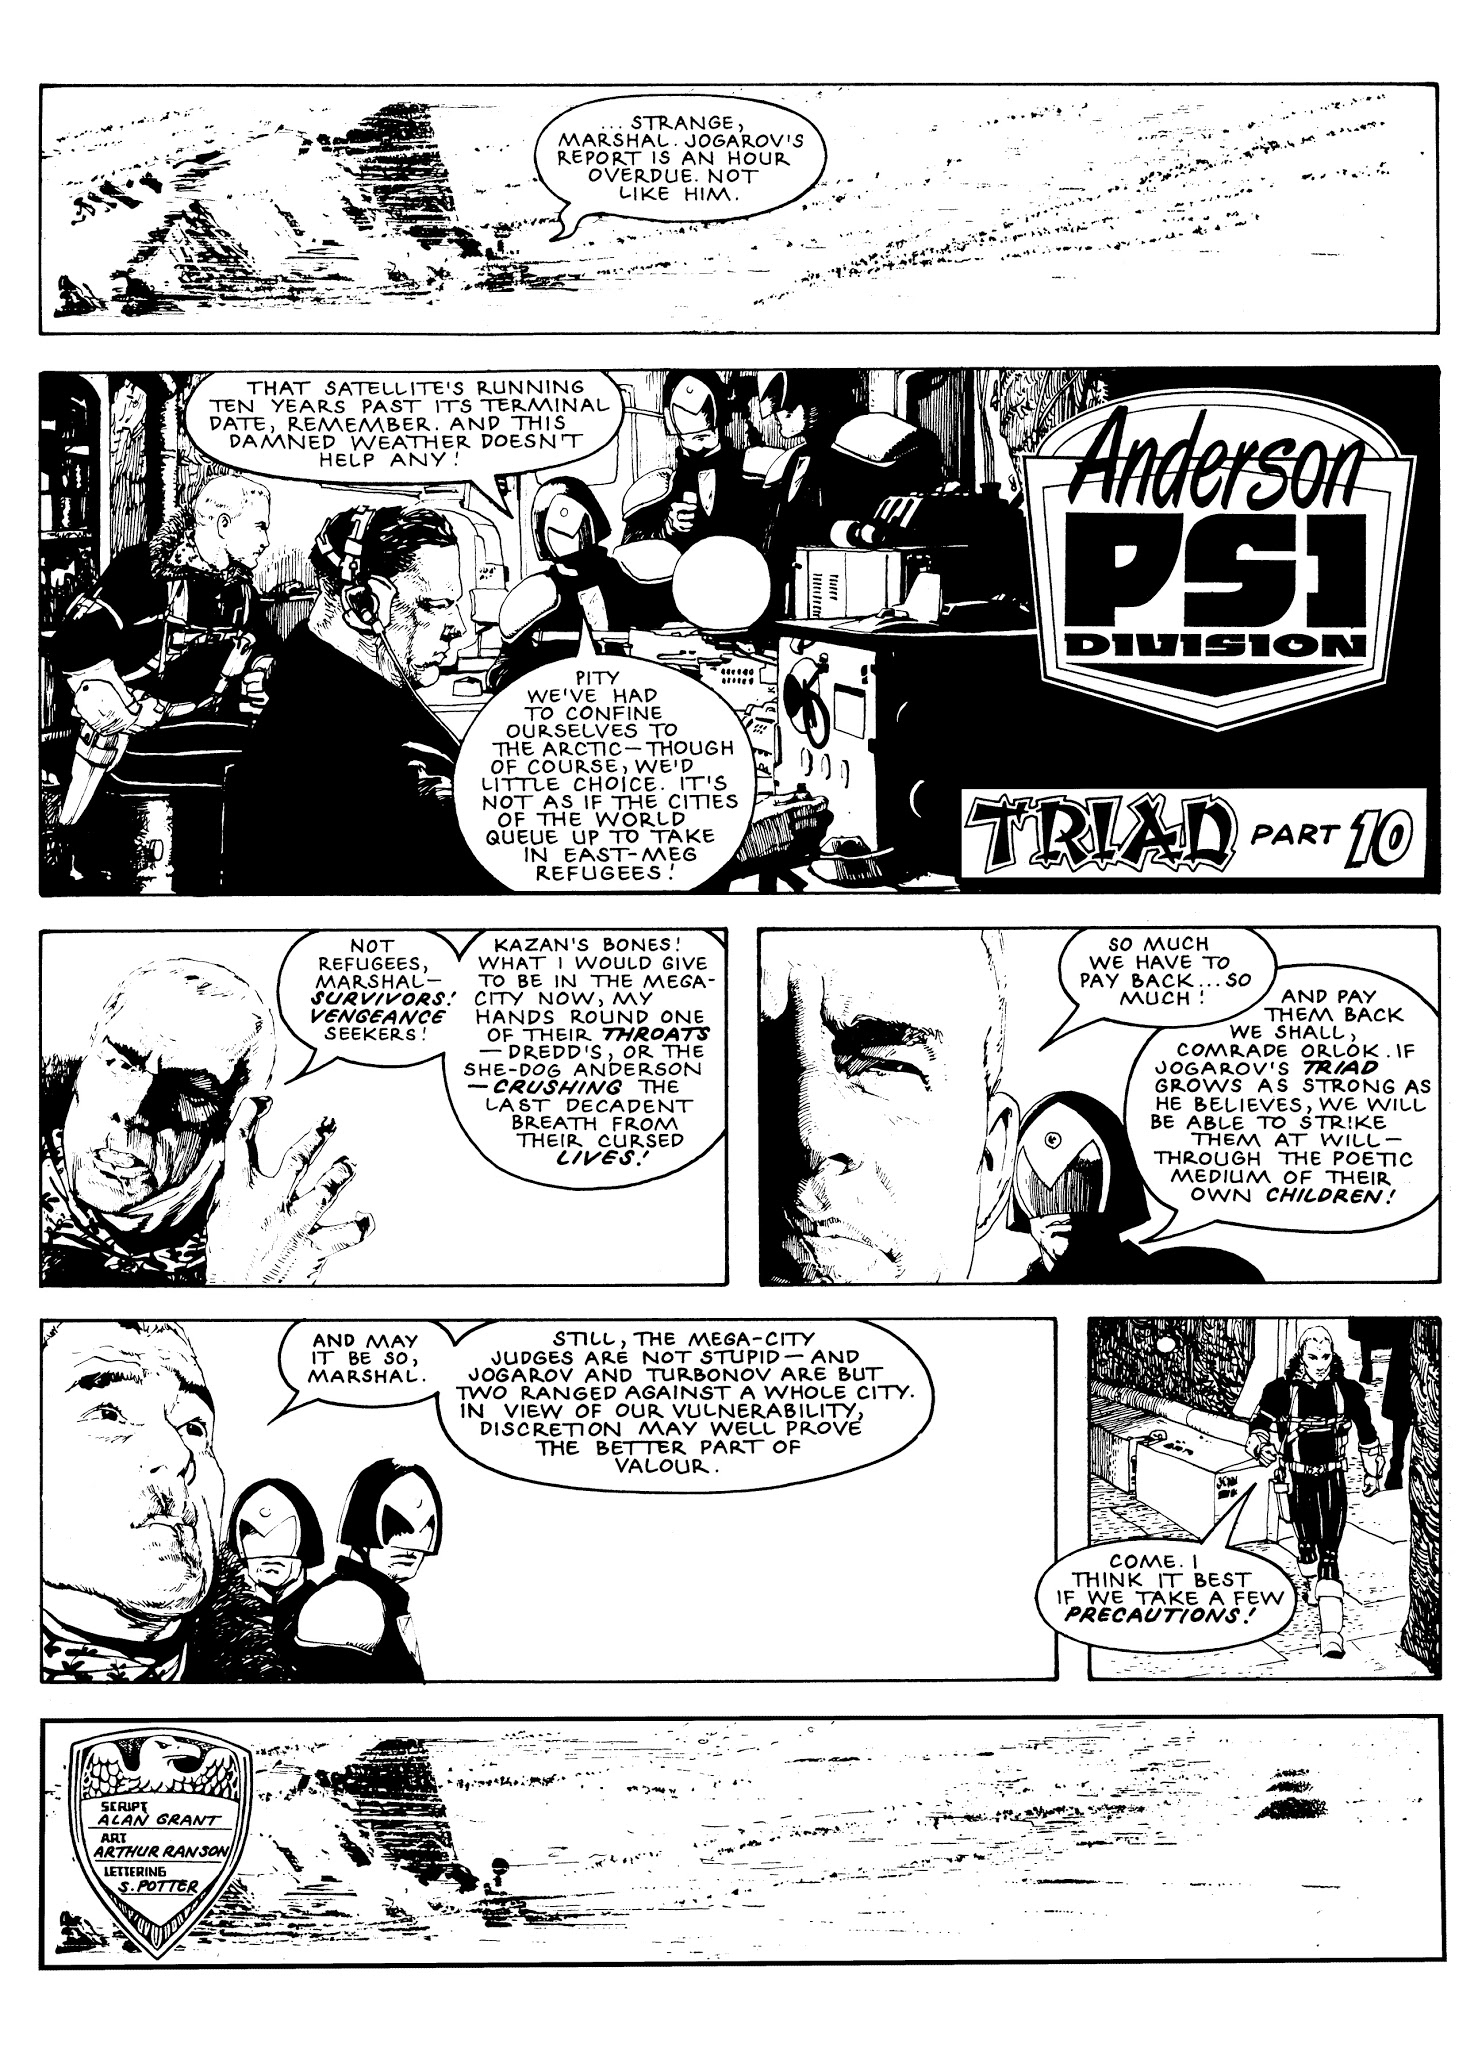 Read online Judge Anderson: The Psi Files comic -  Issue # TPB 1 - 311